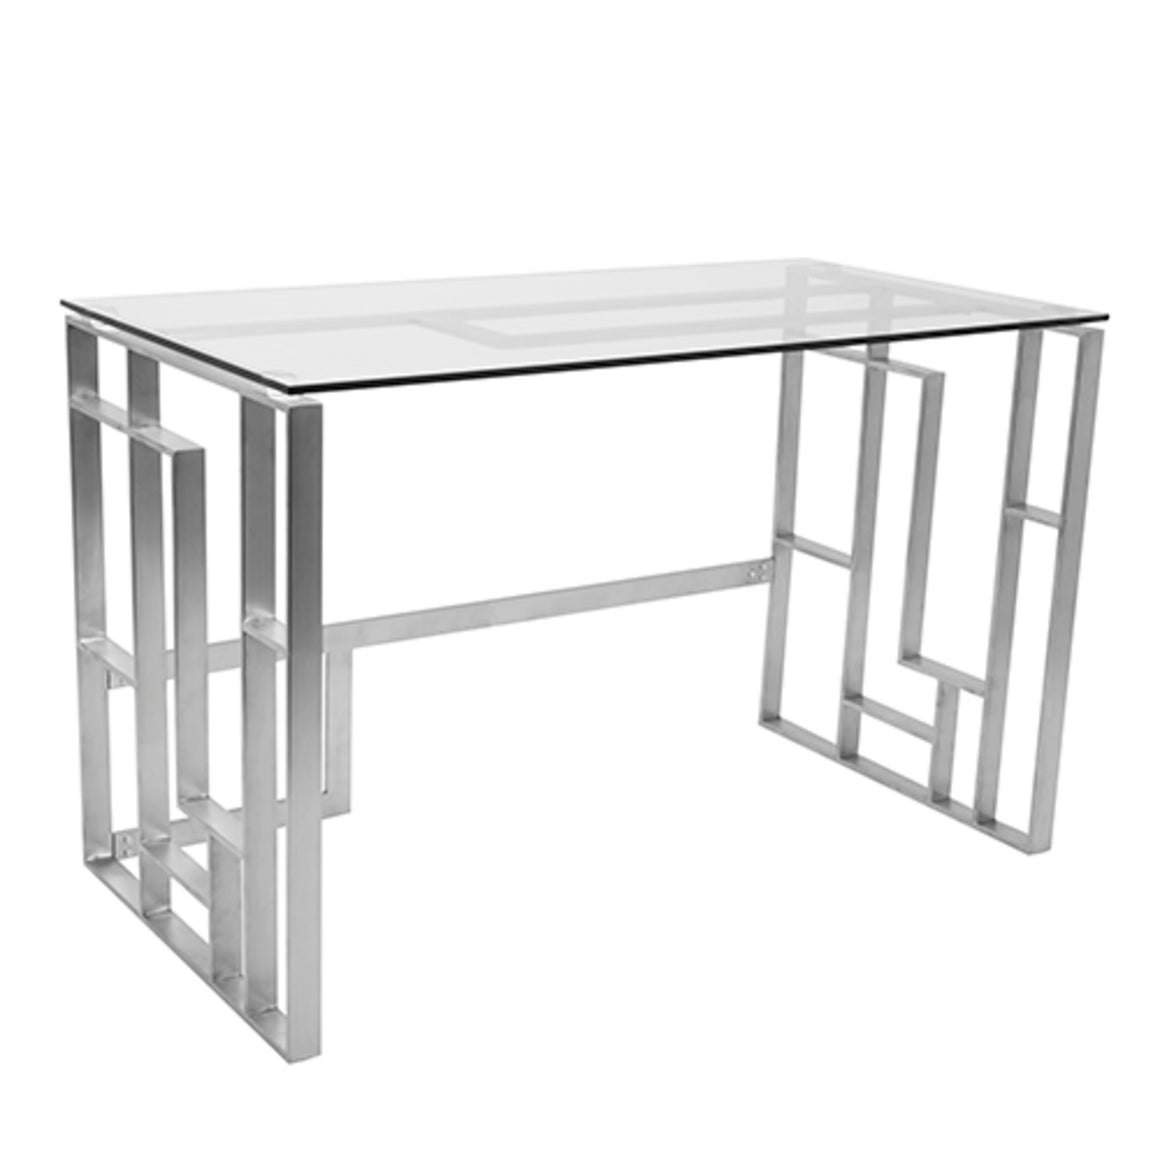 Mandarin Contemporary Desk in Brushed Stainless Steel and Clear Glass by LumiSource